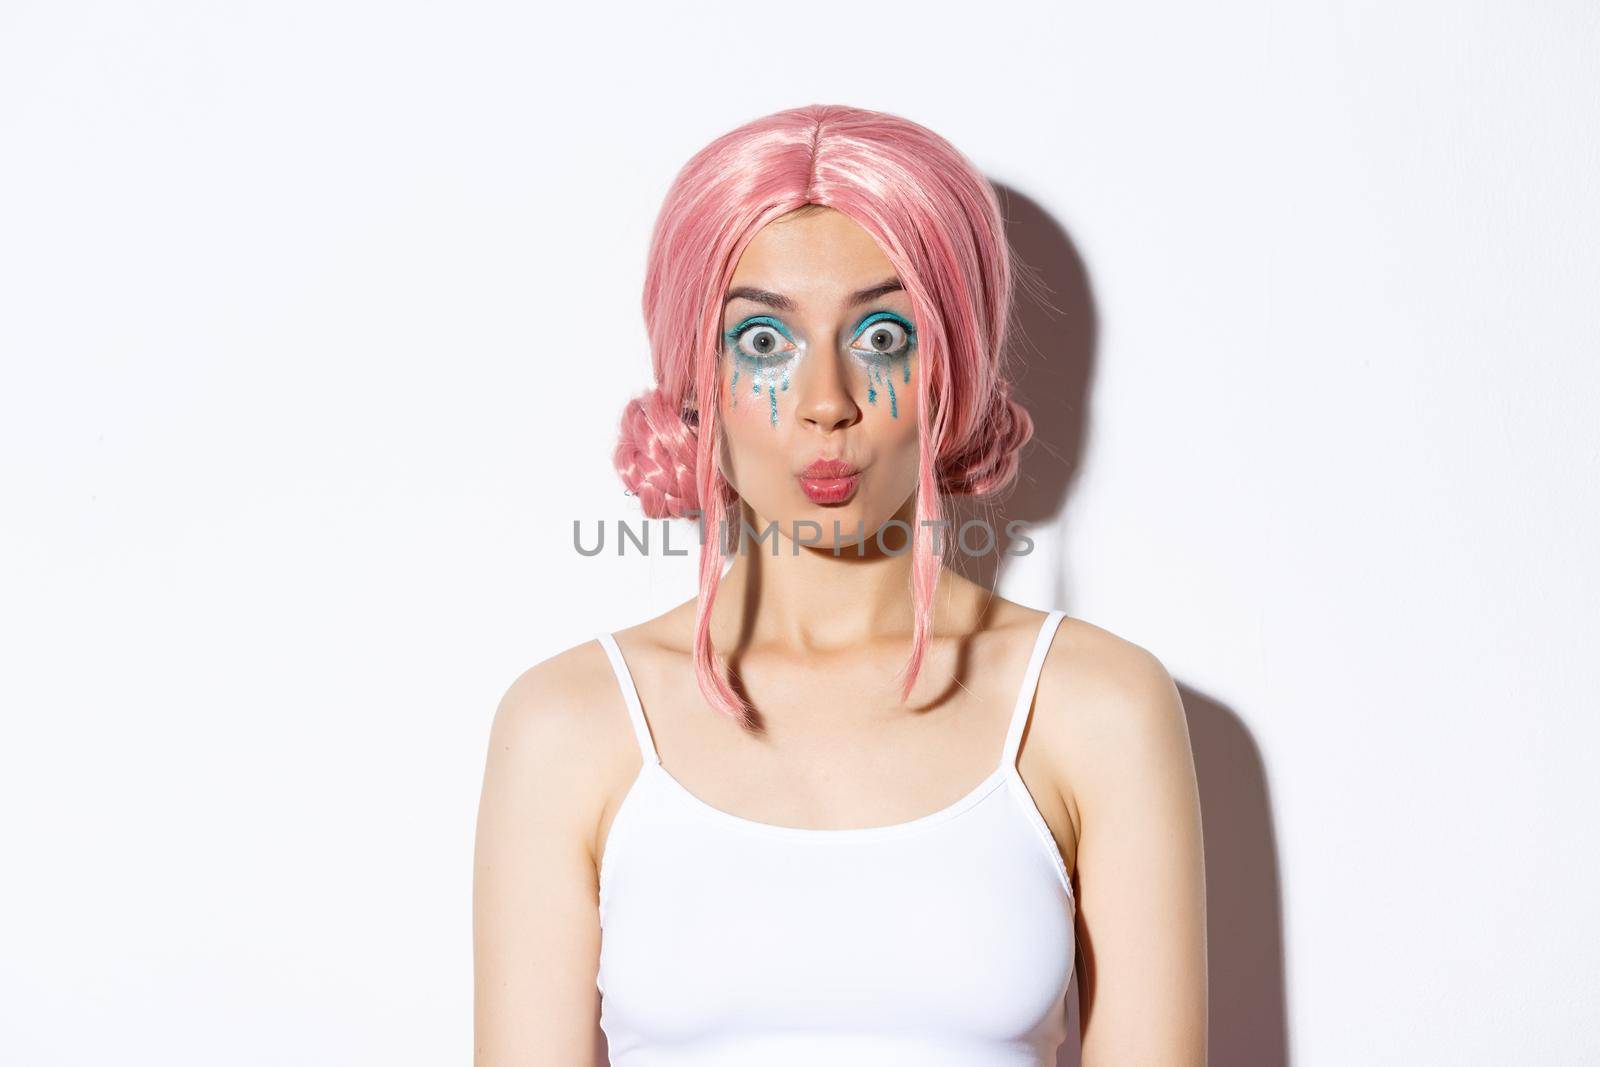 Close-up of surprised attractive girl in pink wig and fairy costume, looking amused, celebrating halloween, standing over white background.